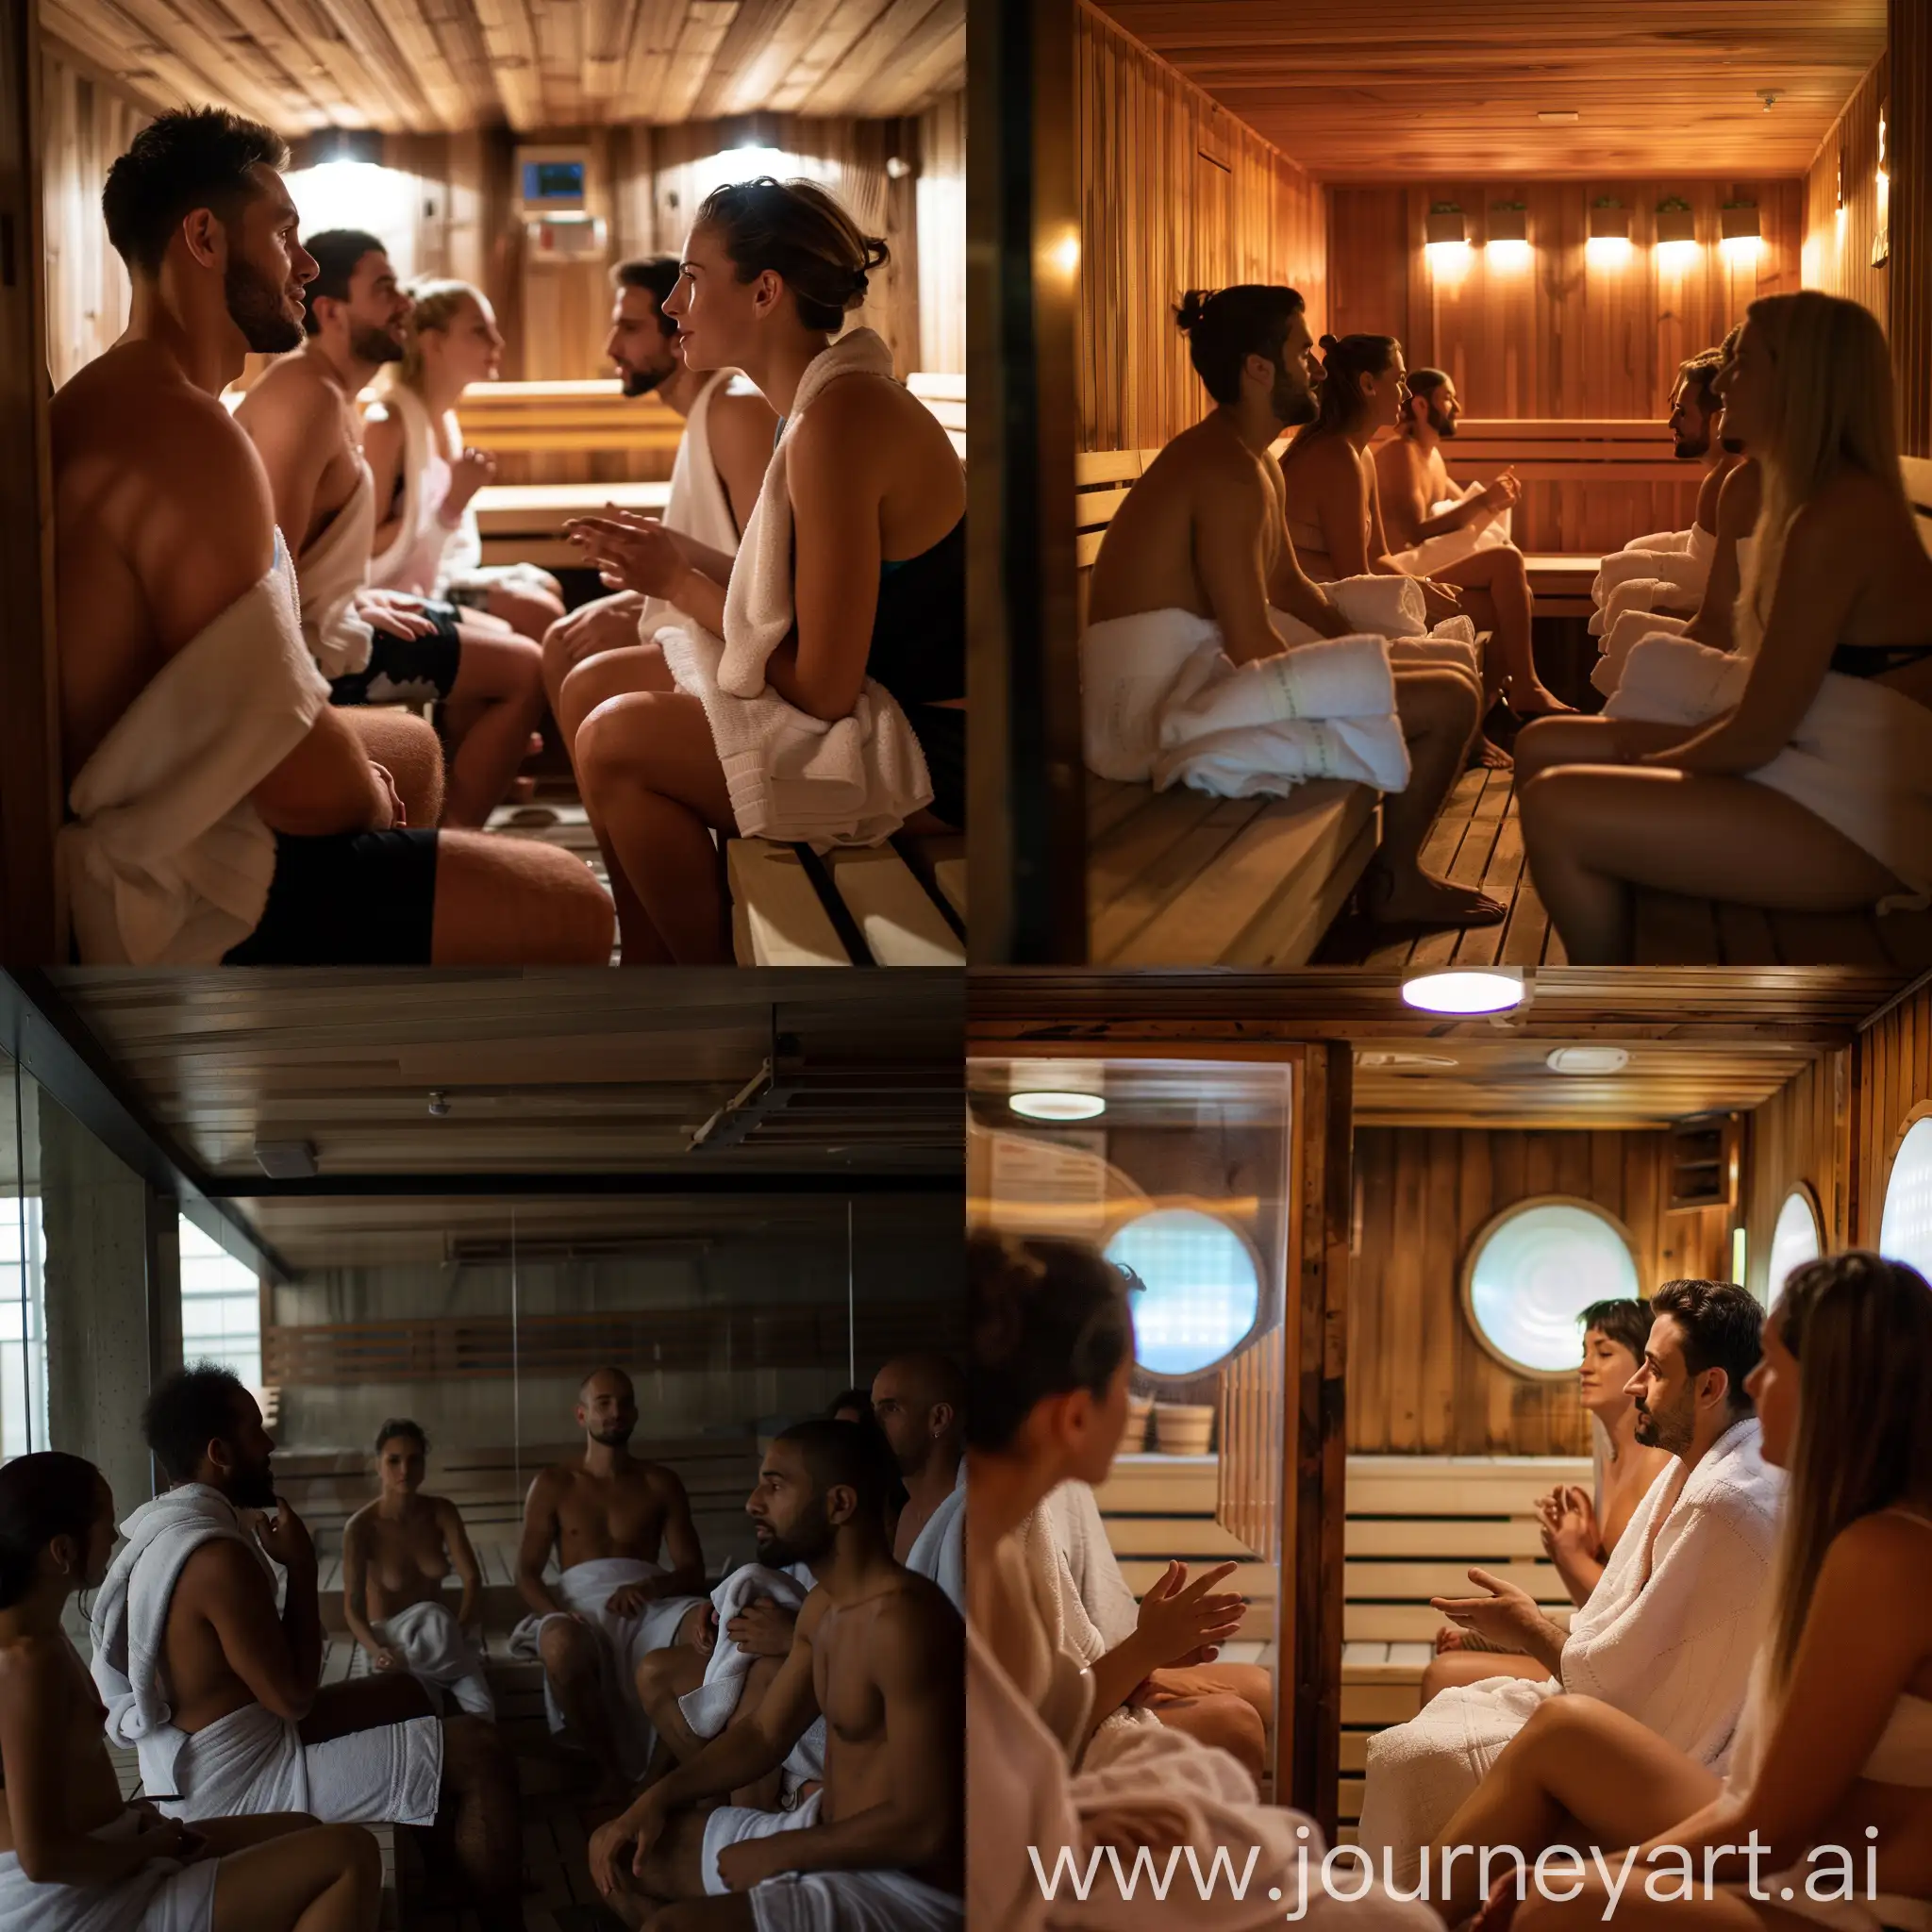 Detailed photo of multiple people sitting in sauna with towels on, chatting to each other on serious topics, dslr quality,